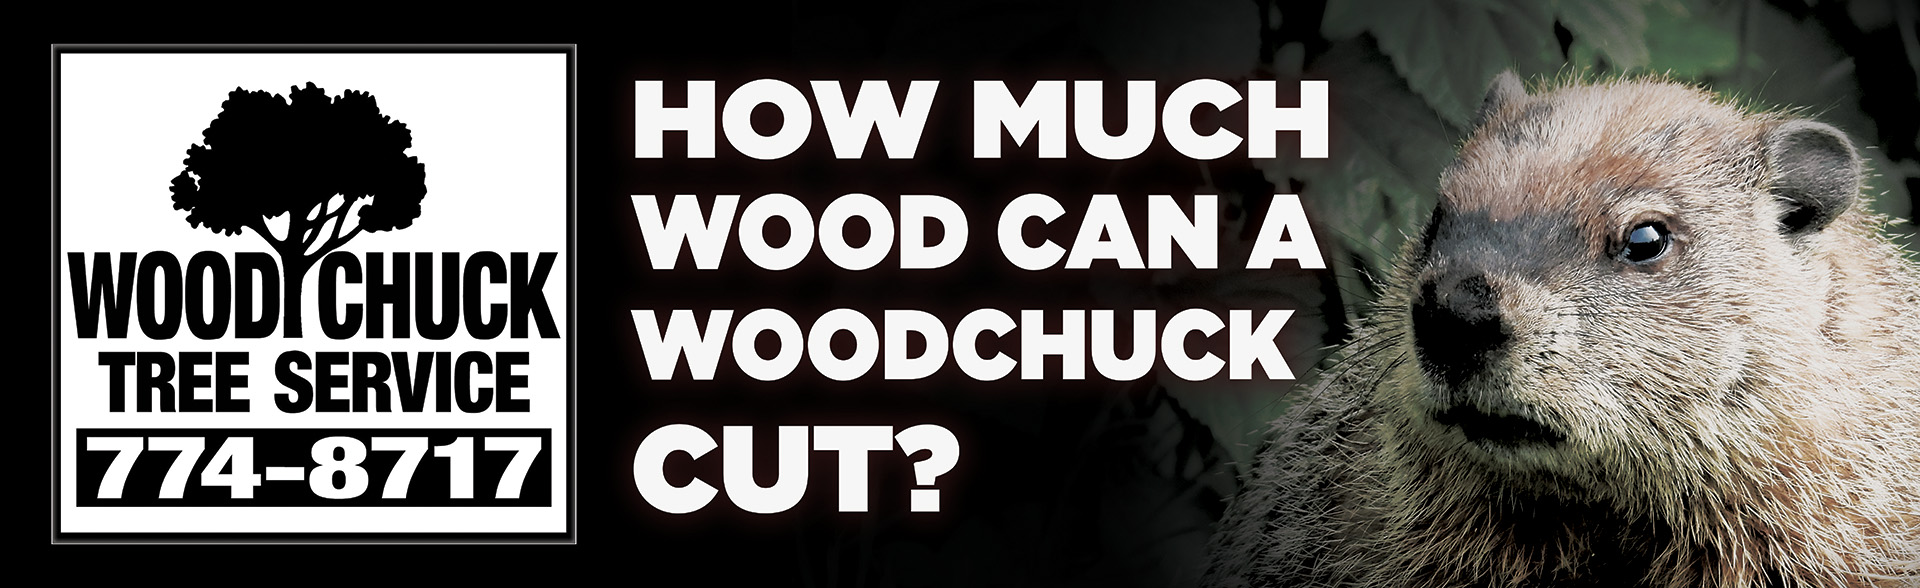 WoodChuck Tree Services, tree services, tree removal services, tree pruning, tree trimming